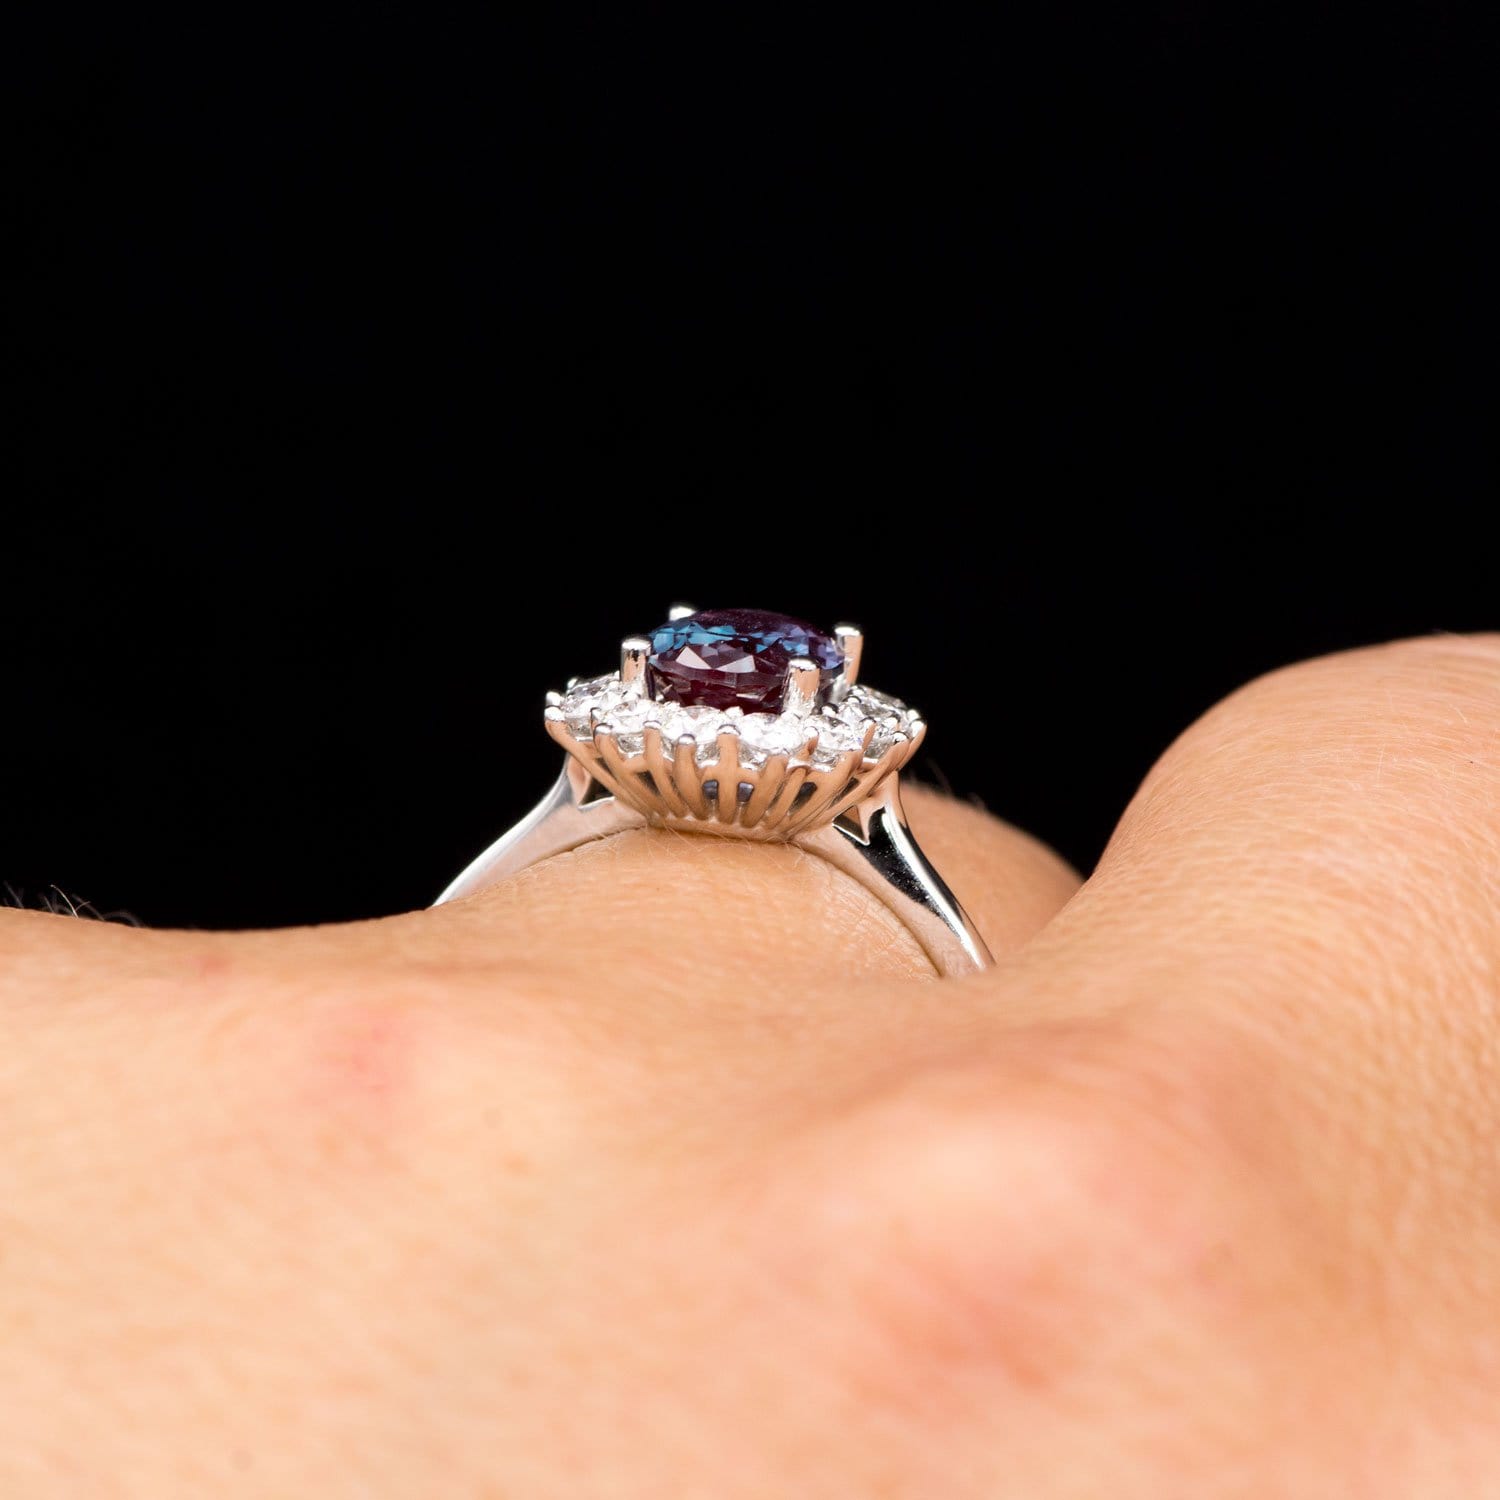 Do You Sleep with Your Engagement Ring On? You May Want to Reconsider. |  Ritani